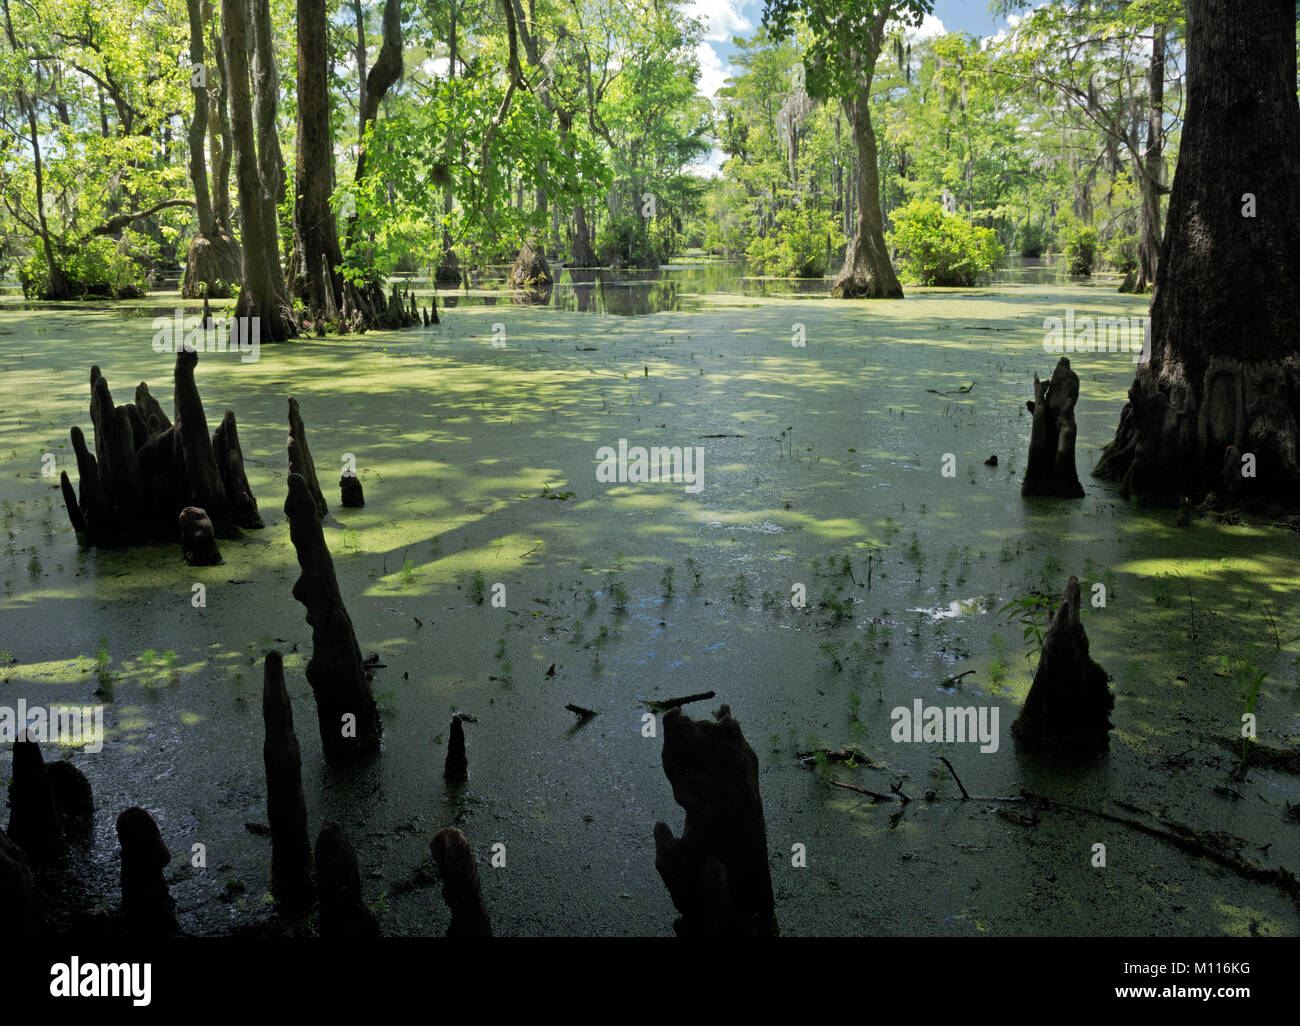 NC01443-00...NORTH CAROLINA - Cyress knees sticking through the duckweed in the still waters of Merchant Millpond in Merchant Millpond State Park. Stock Photo